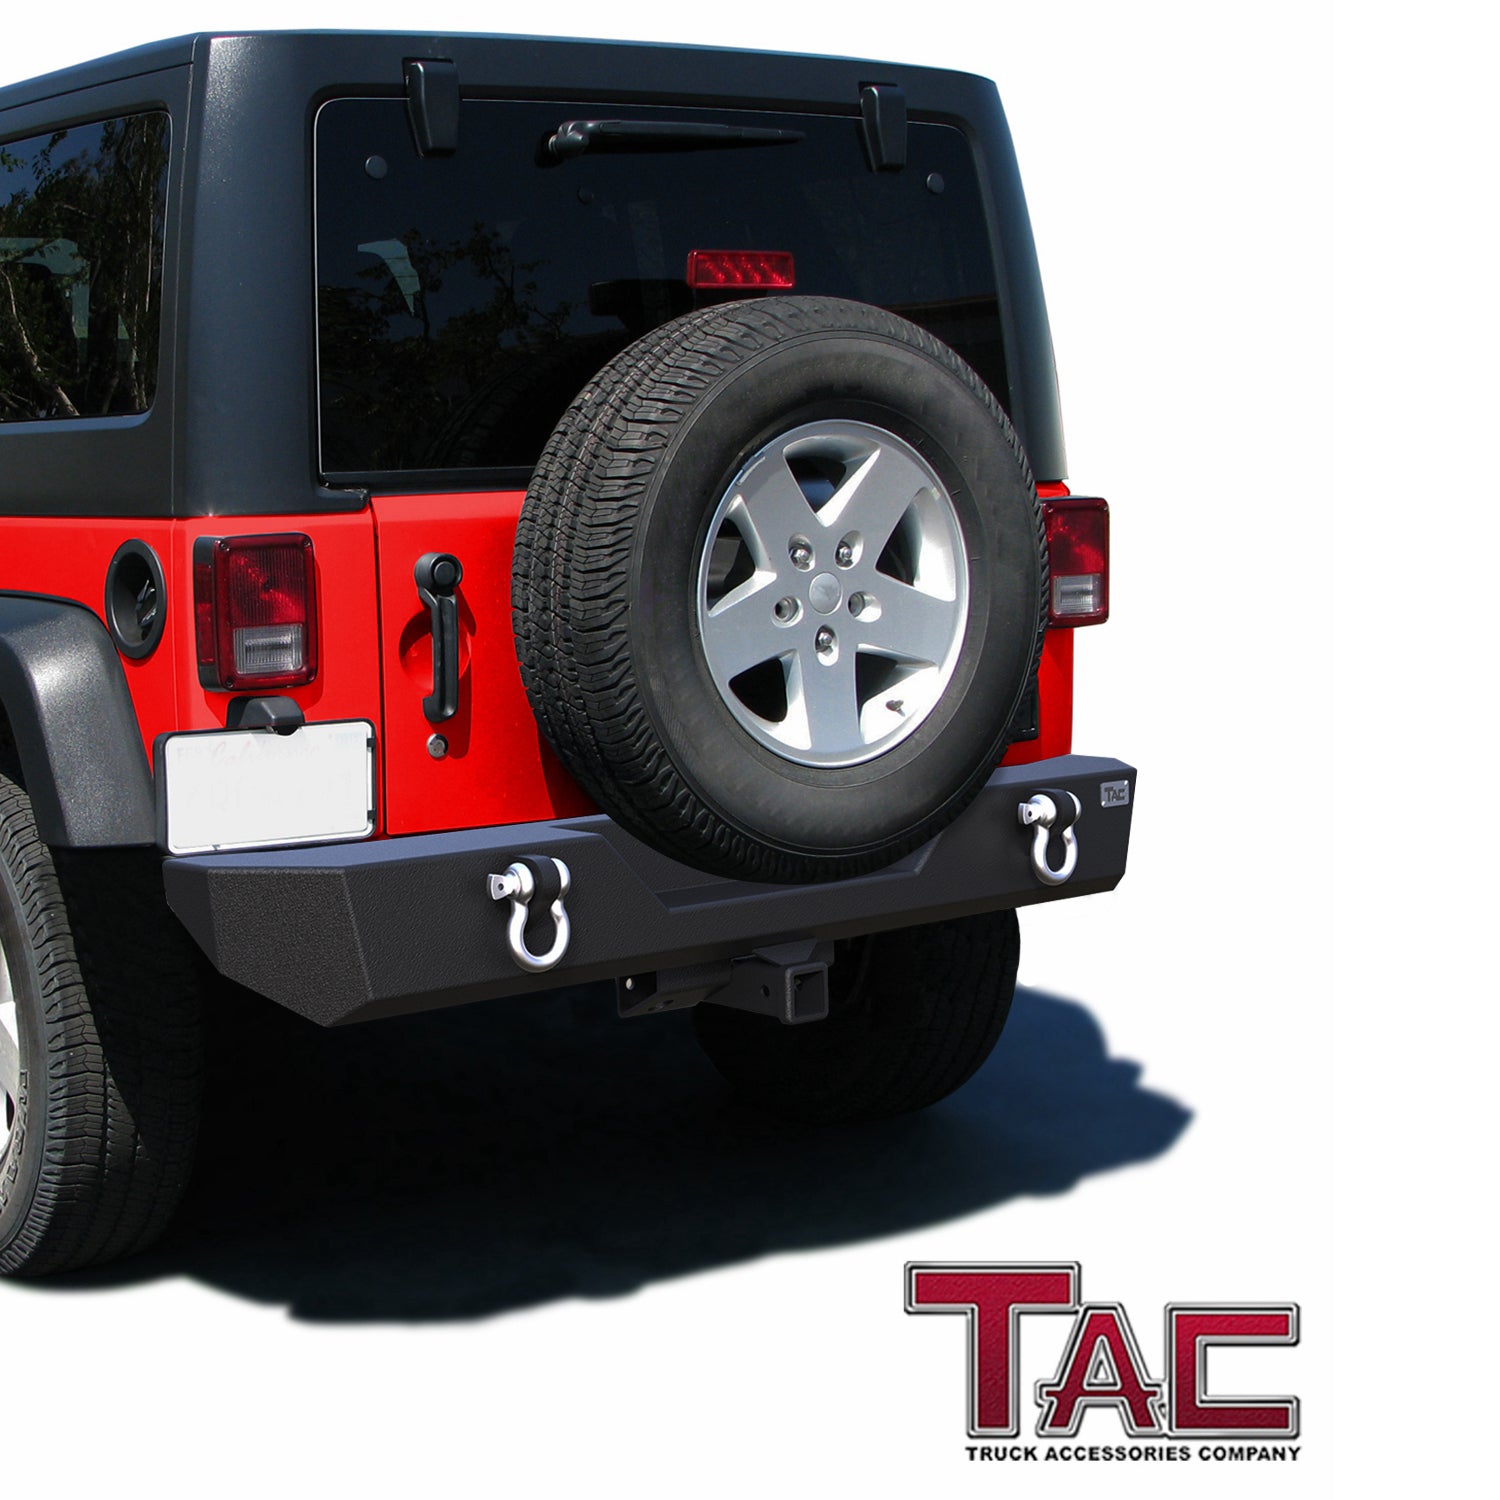 TAC Heavy Texture Black Rear Bumper for 2007-2018 Jeep Wrangler JK (Exclude 18 JL Models)(2" Hitch Receiver and 4.75 Ton D-Rings Included) Bumper Brush Grille Guard Nudge Bar - 0